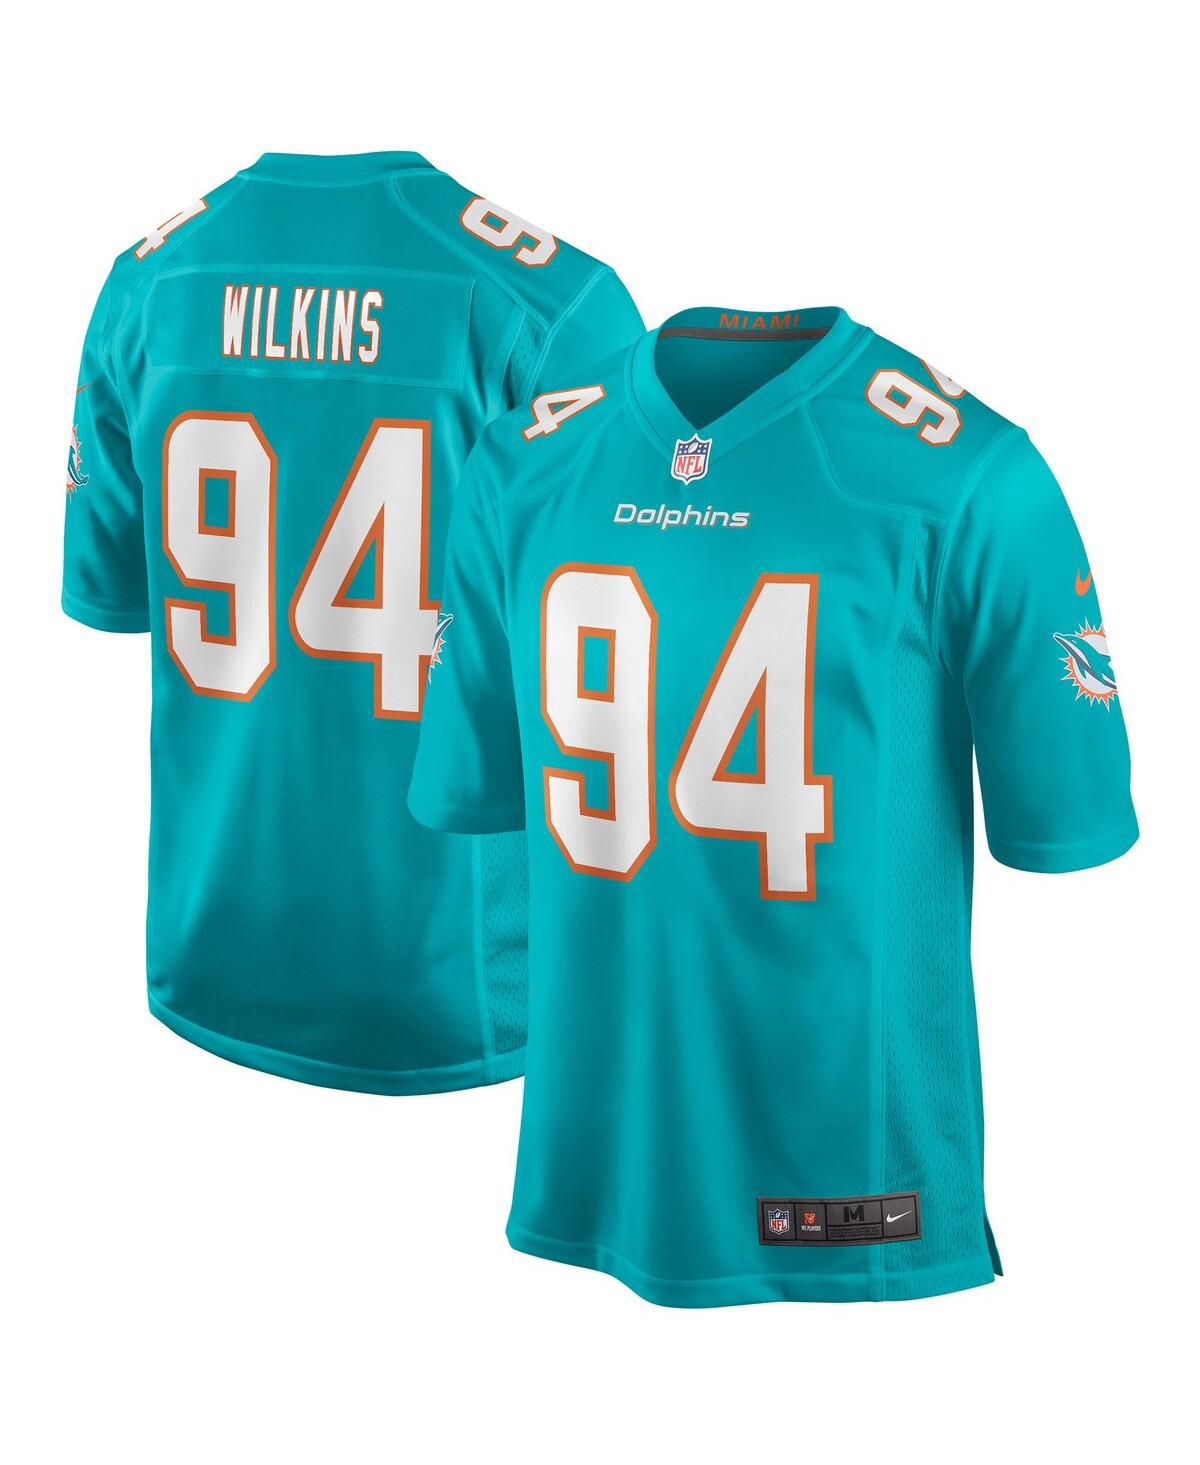 UPC 192235598329 product image for Men's Nike Christian Wilkins Aqua Miami Dolphins Game Jersey | upcitemdb.com